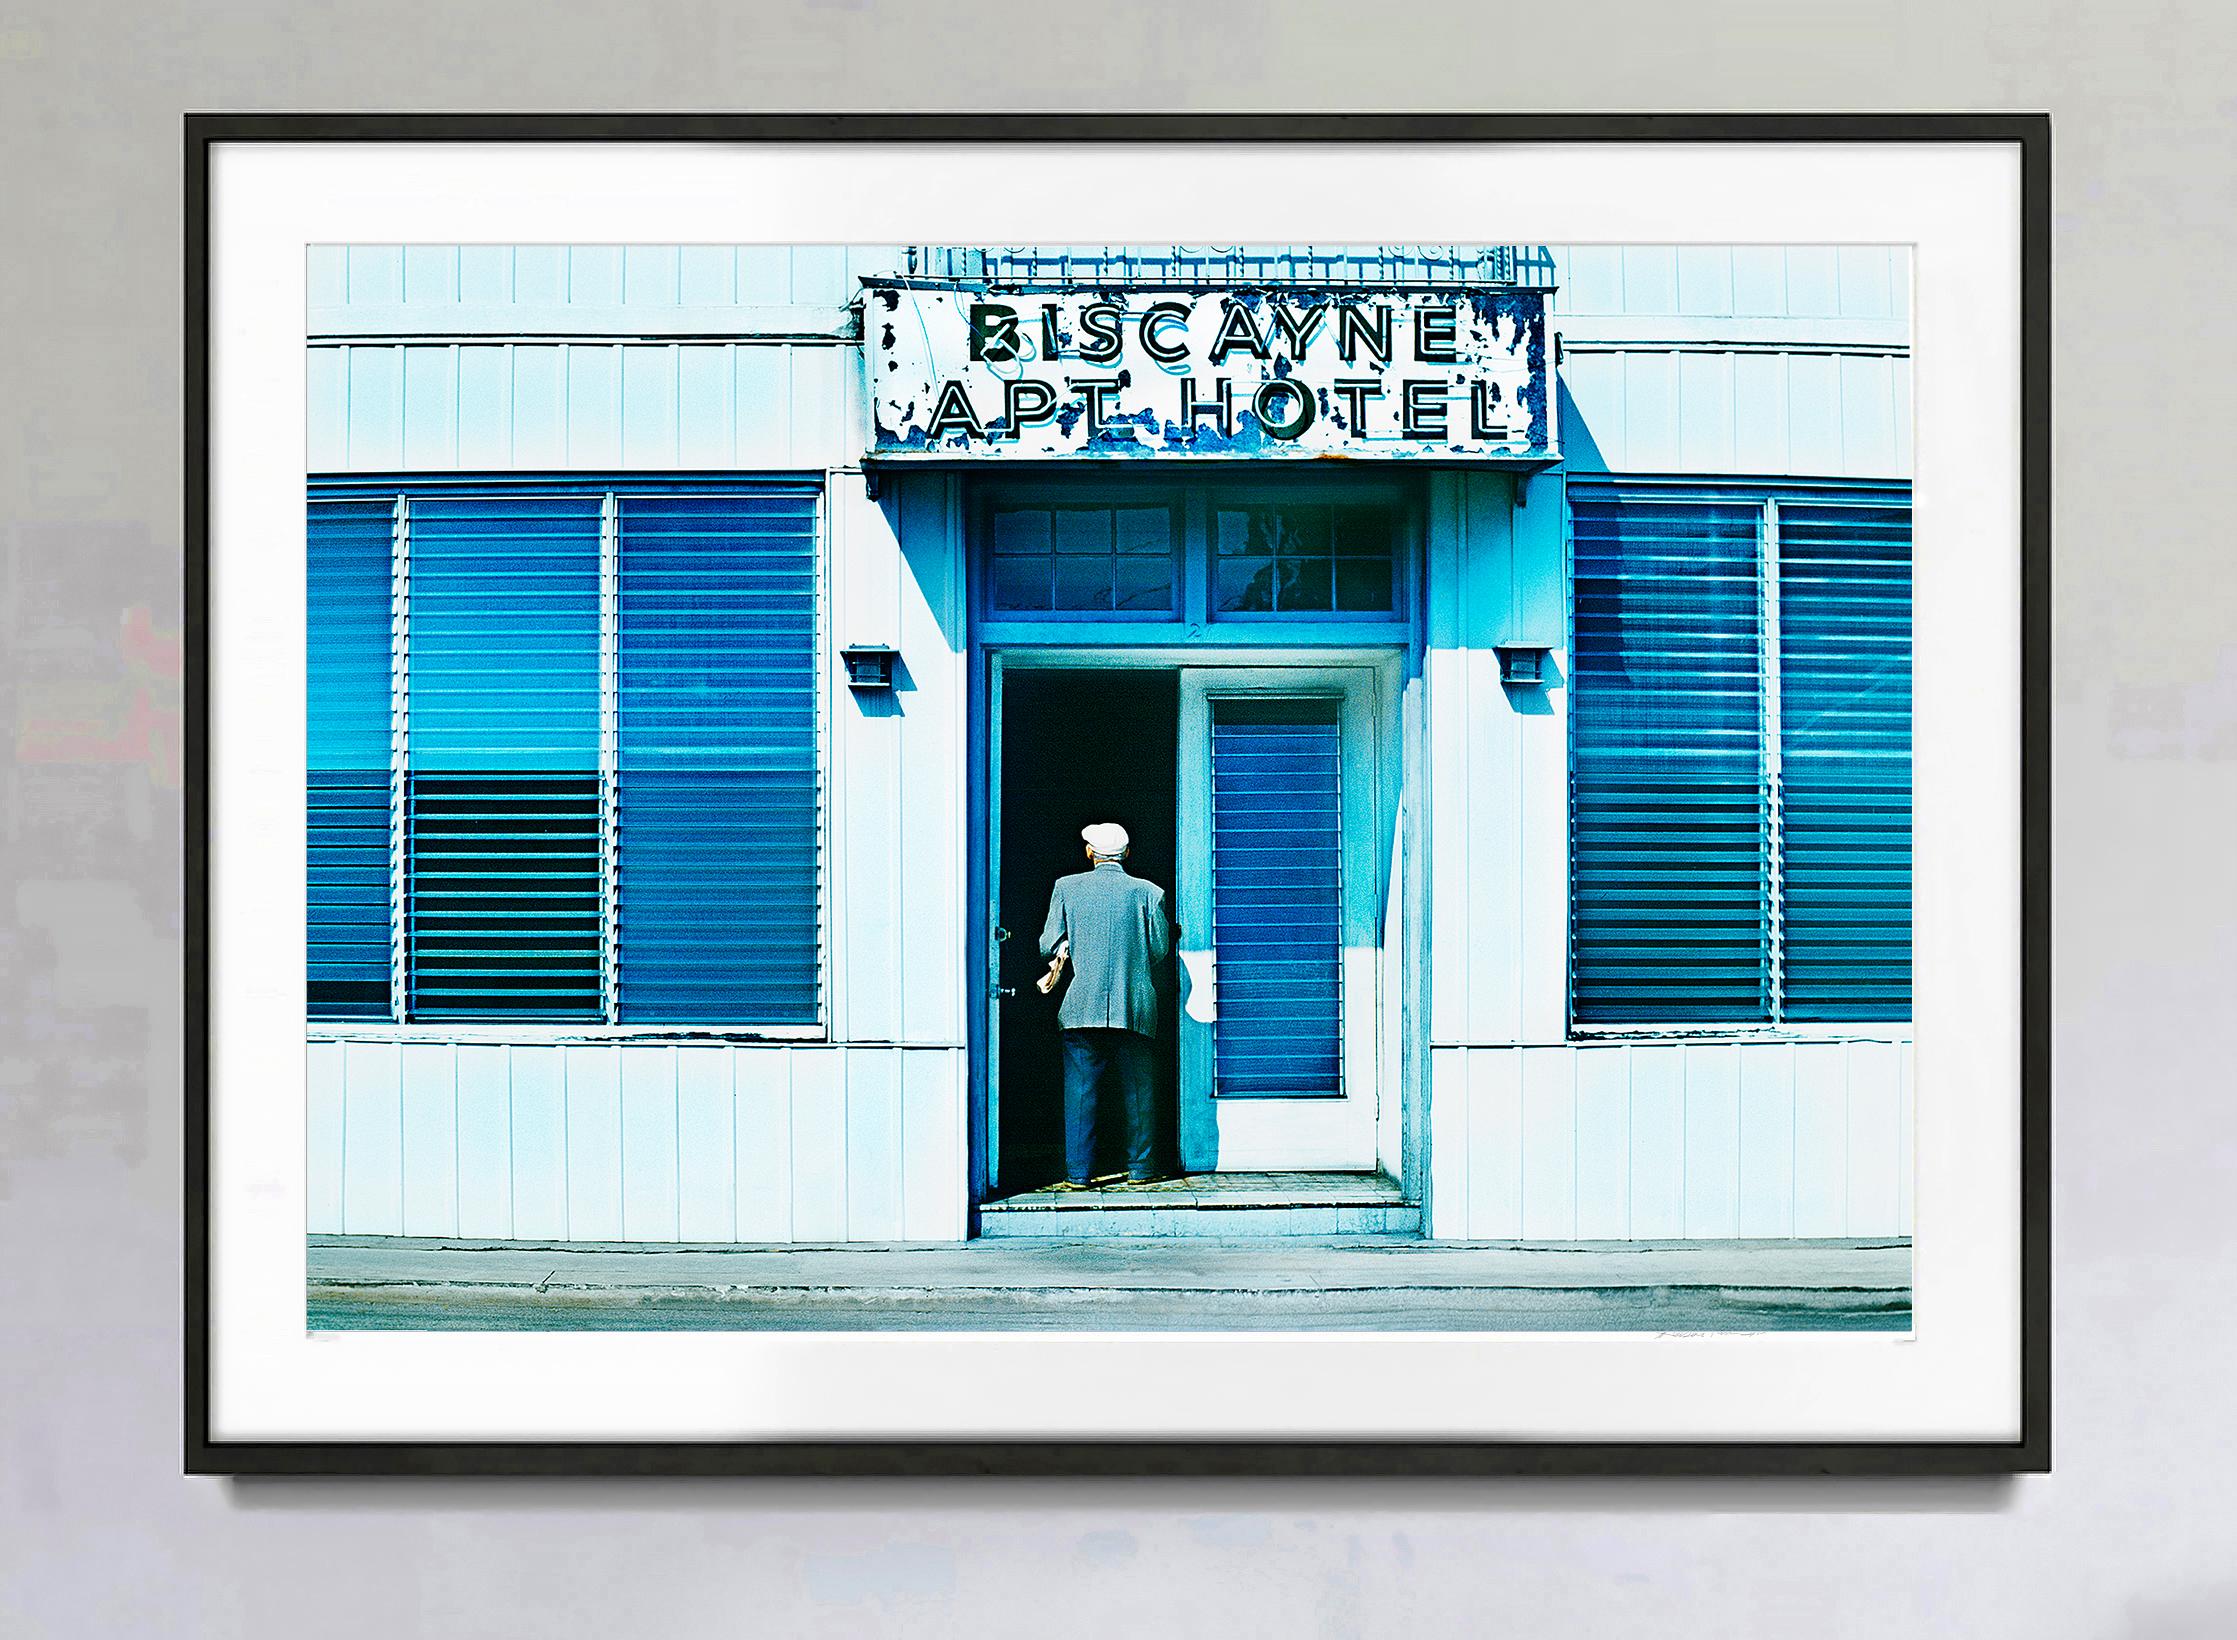 South Beach in the 1970s. Old Man Walking Enters Building - Old Miami Beach - Photograph by Mitchell Funk